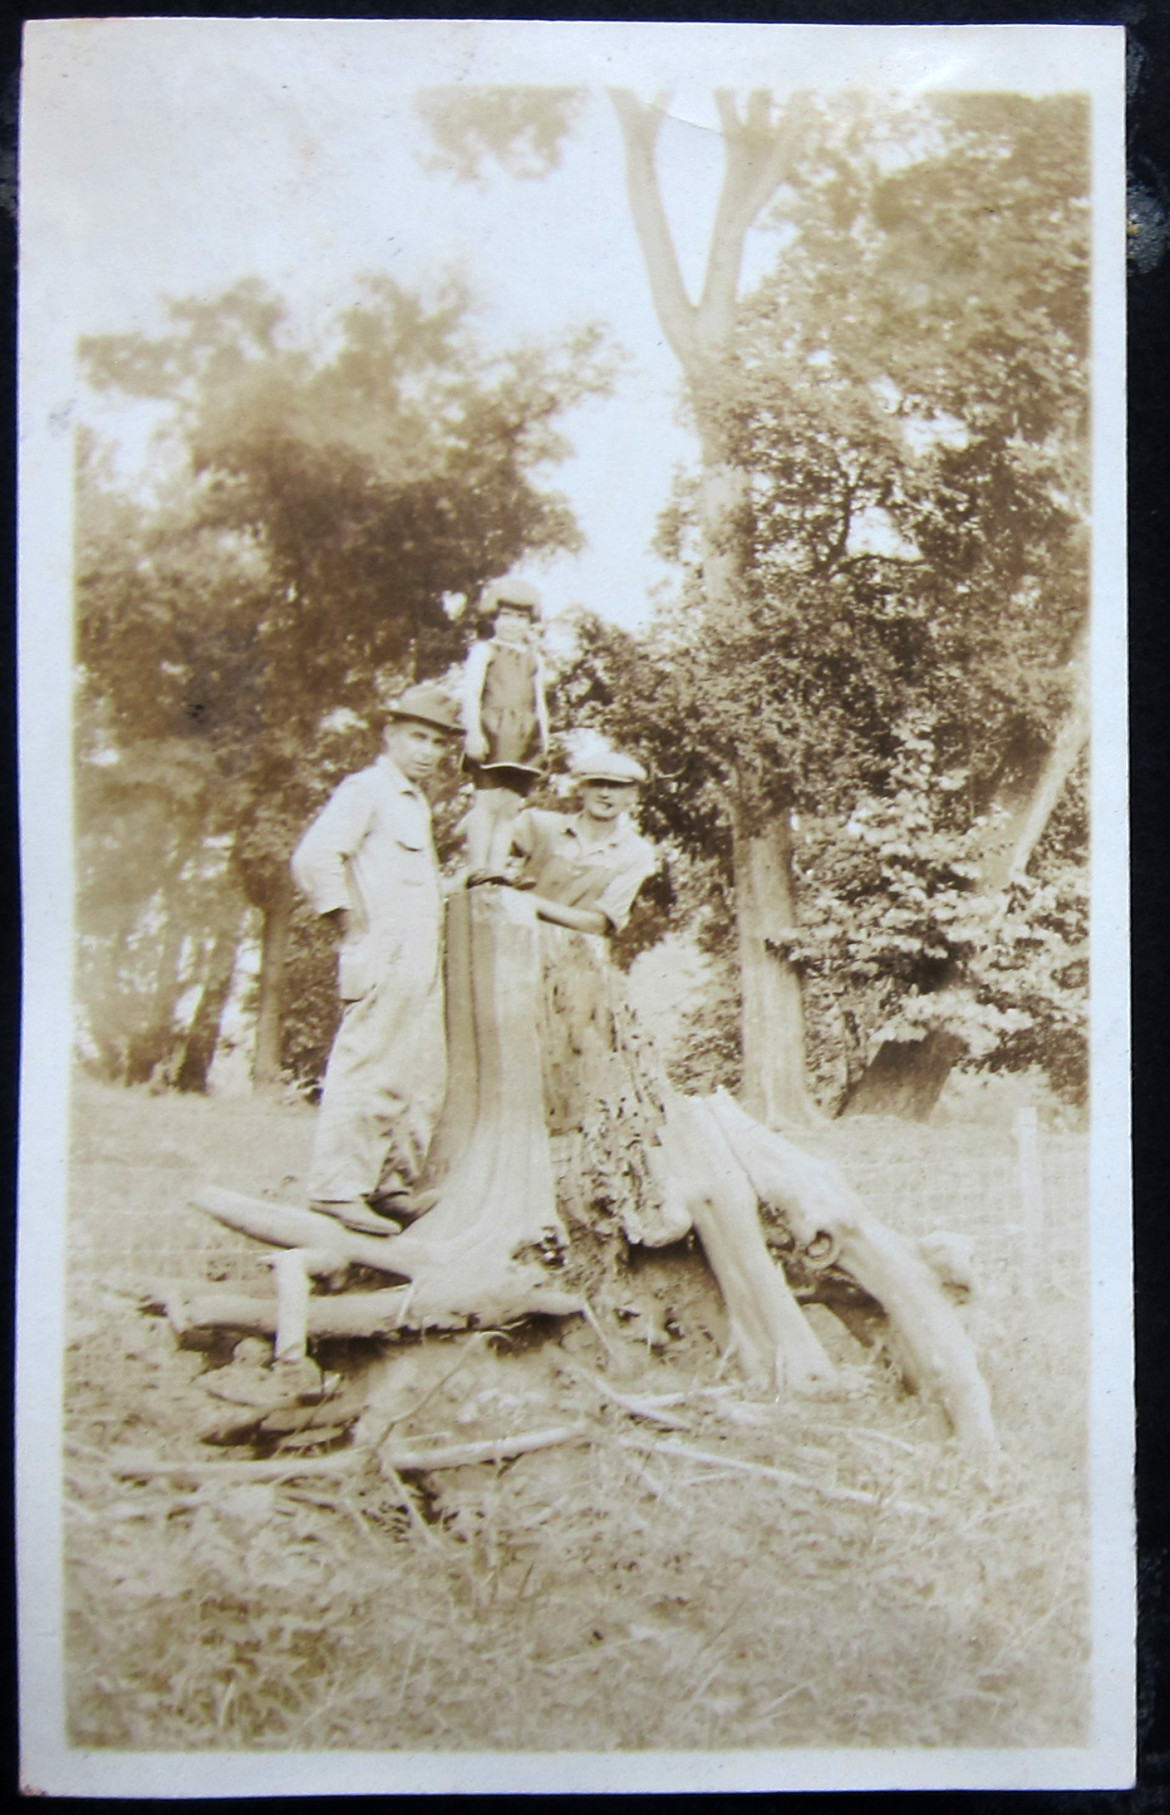 Here father Albert is on the left and Marjorie is on the stump.  It is not known is this was an early indicator of a later interest in politics.  The other gentleman and location are unknown.